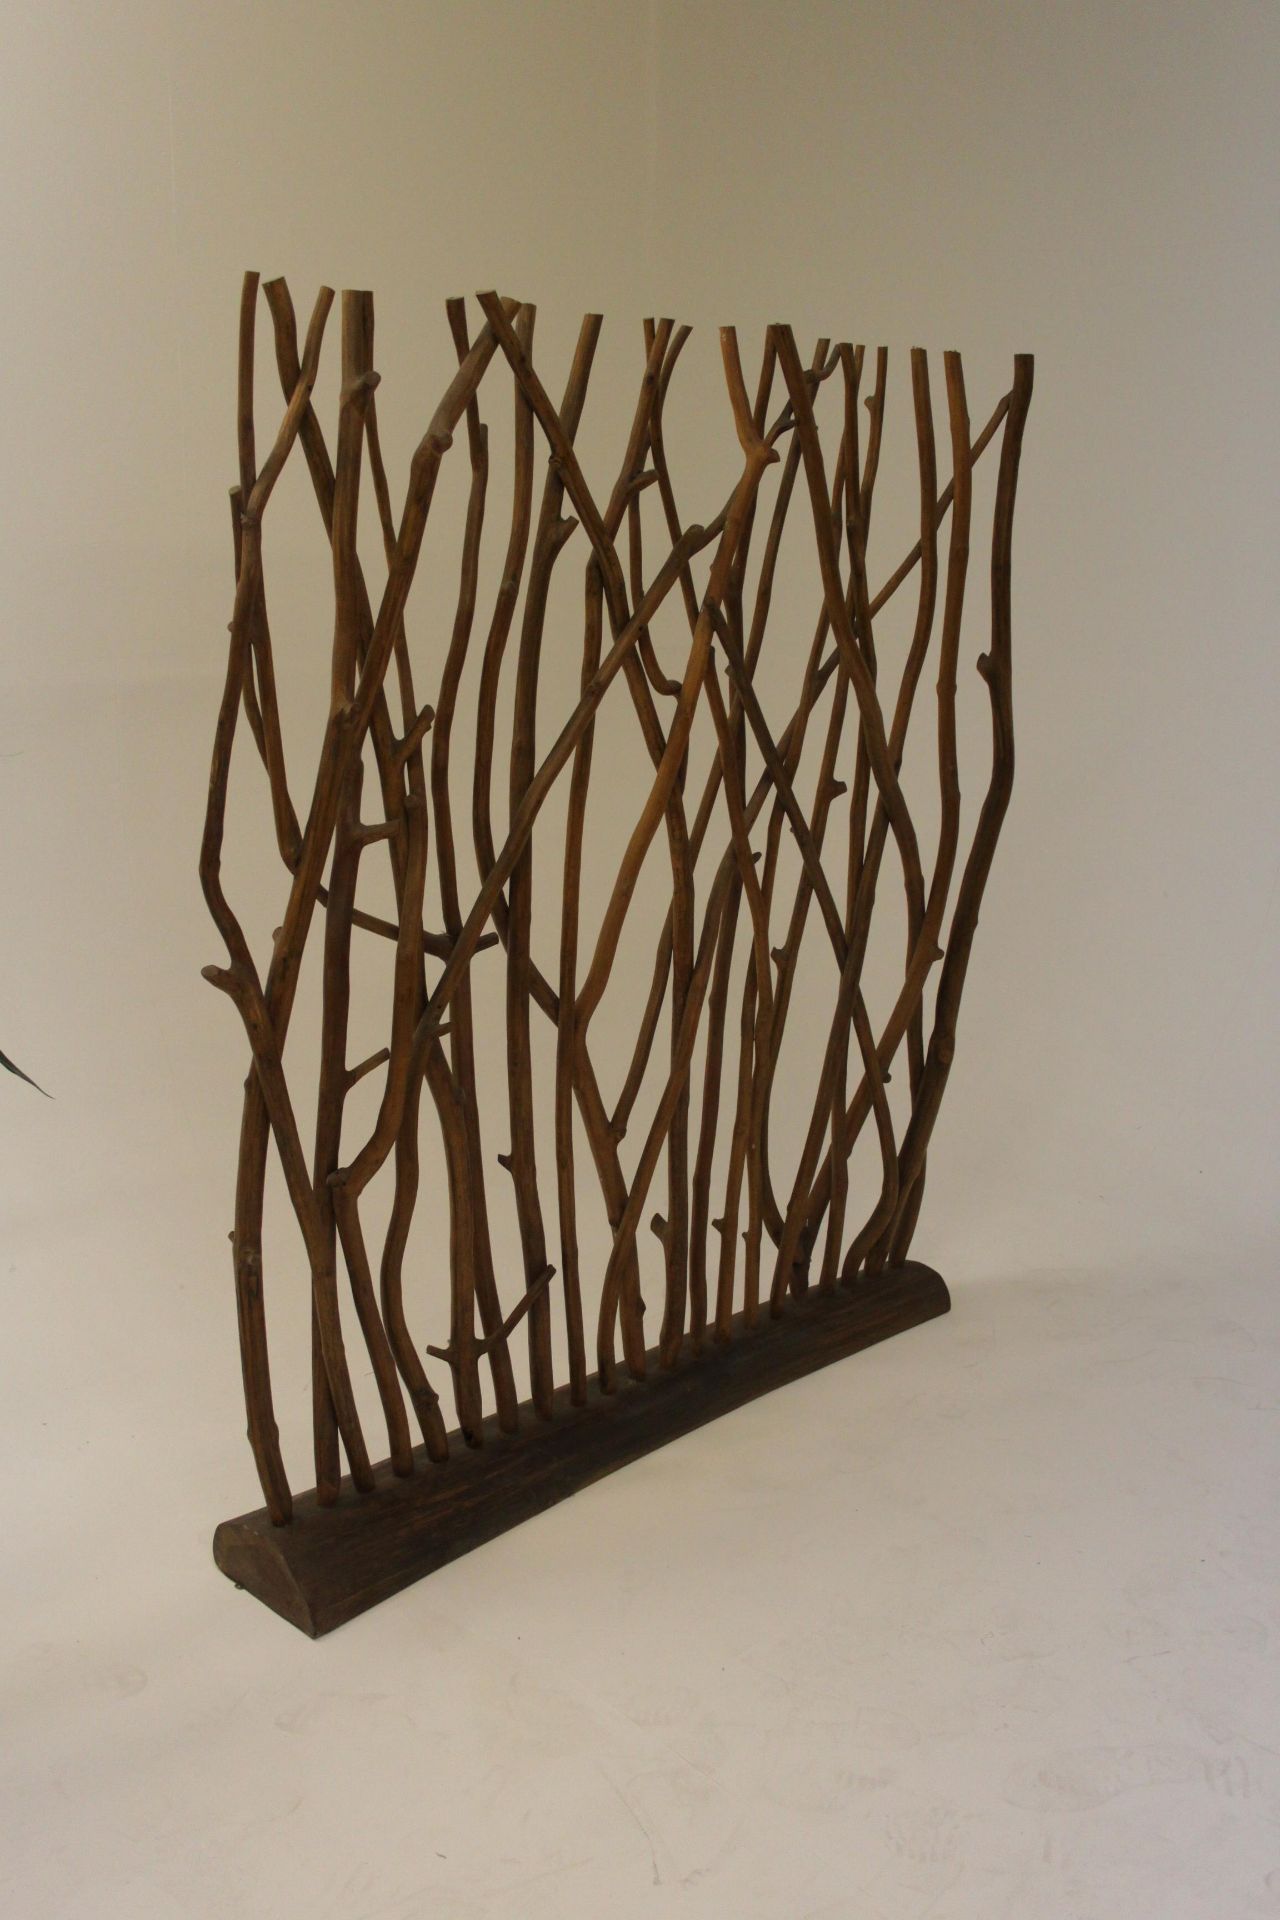 Twig Screen Panel Freestanding Privacy Or Divider Panel Bring A Little Nature To The Living Space ( - Image 2 of 3